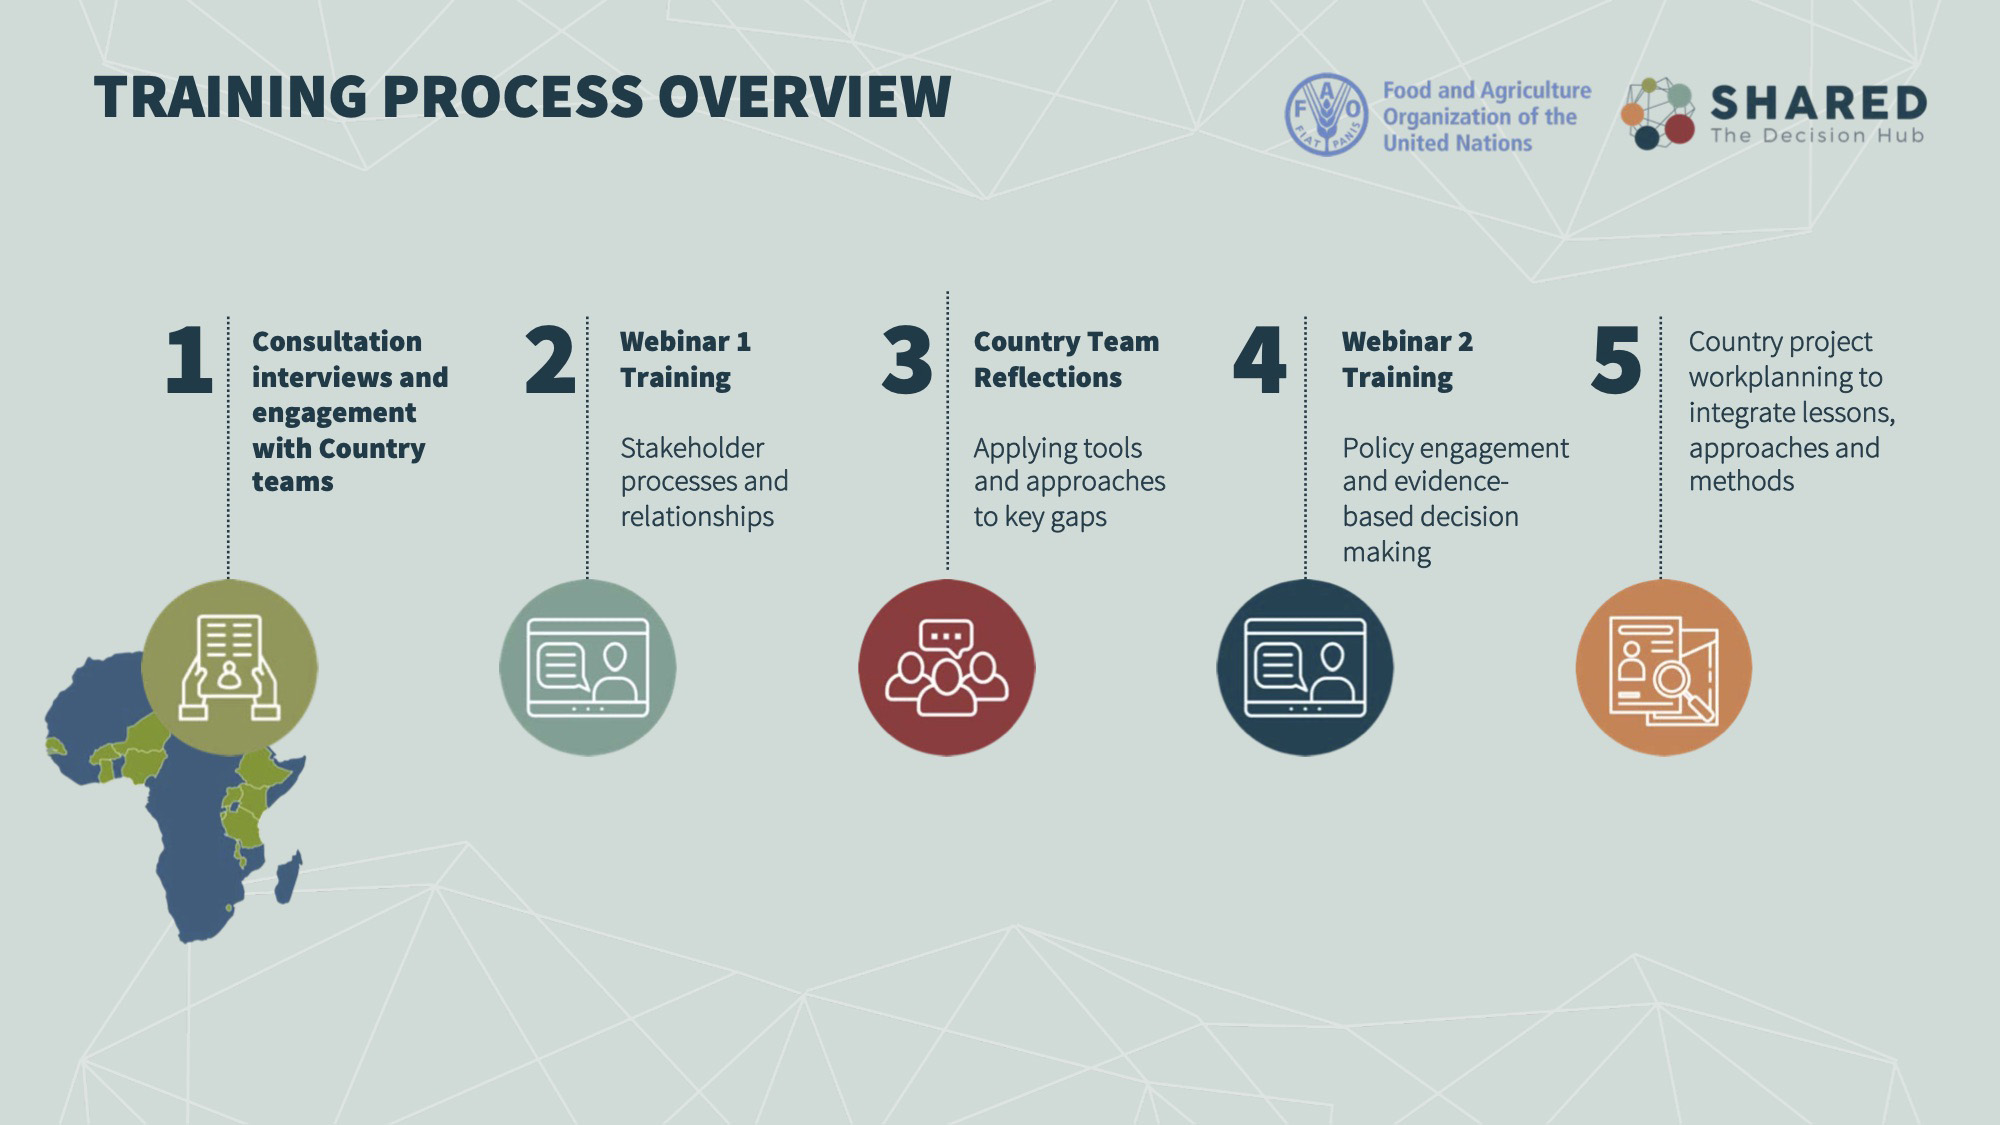 The FAO SHARED training will take place over the span of two weeks, consisting of 2 webinars followed by periods of at-home practice and workplanning.